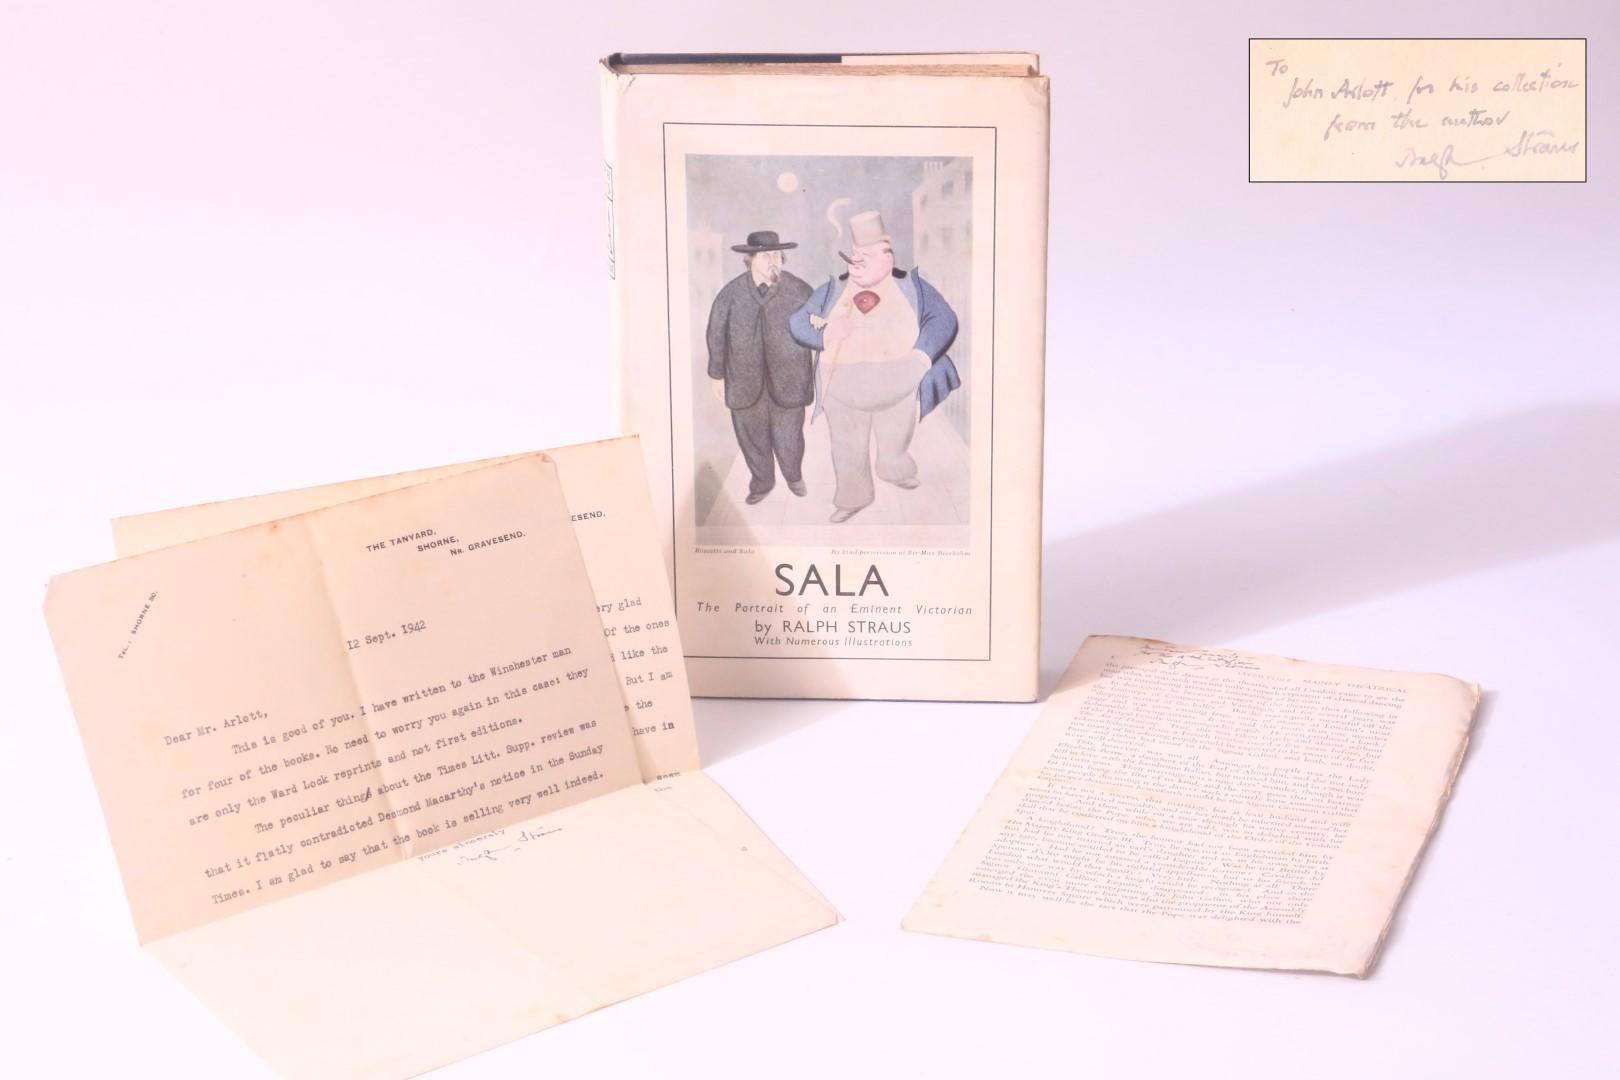 Ralph Straus - Sala: The Portrait of an Eminent Victorian - Constable, 1942, Signed First Edition.